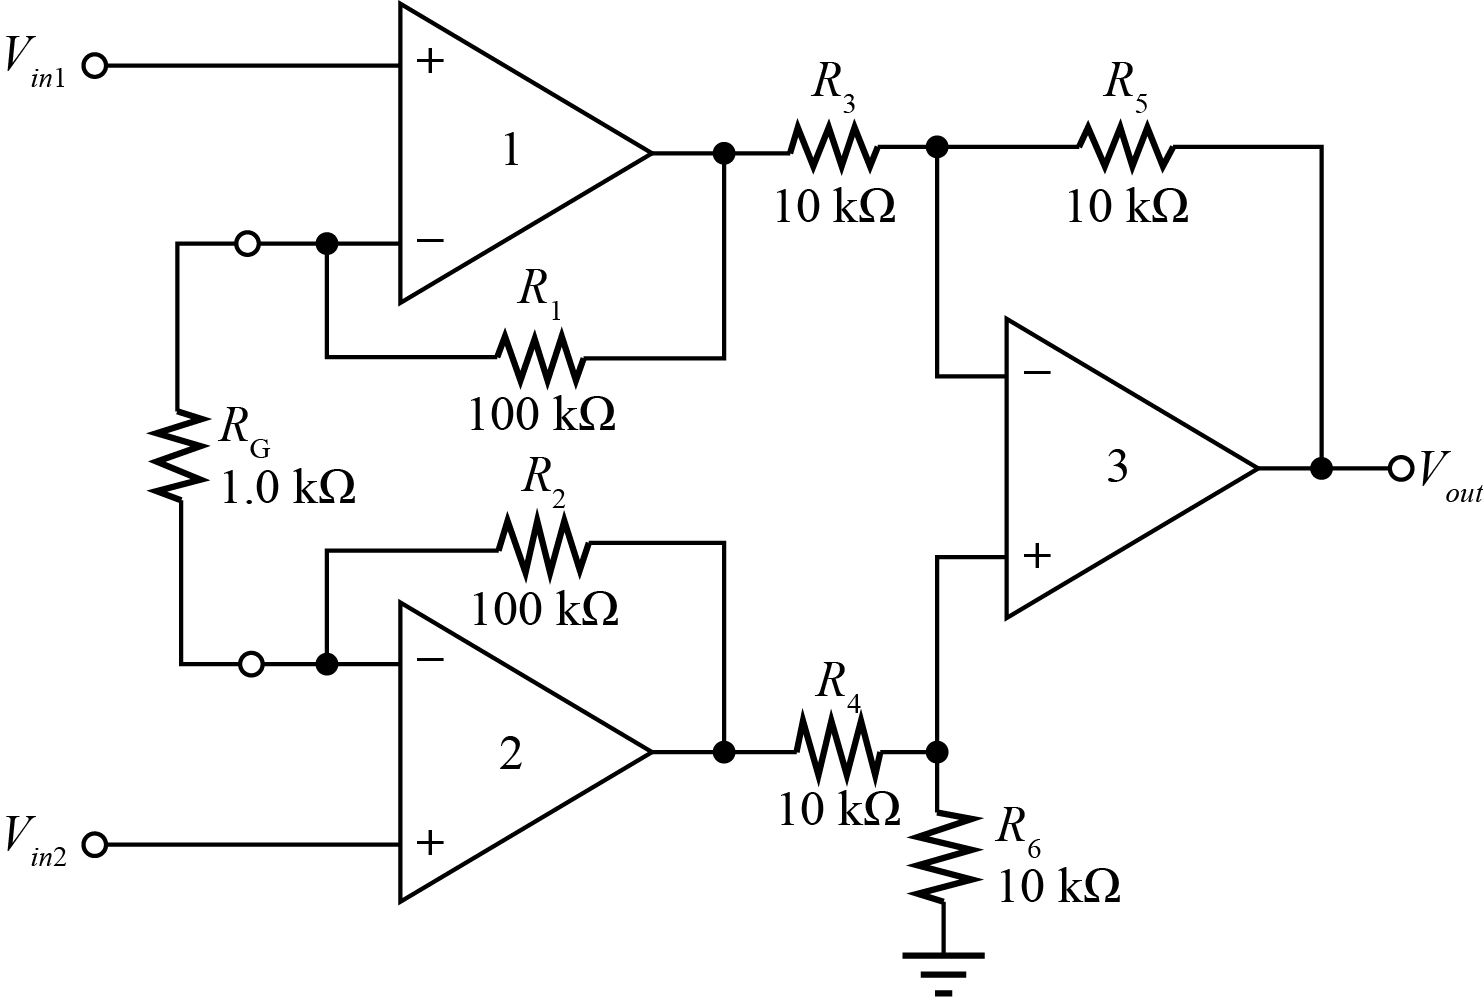 Chapter 8 Solutions | Basic Operational Amplifiers And Linear